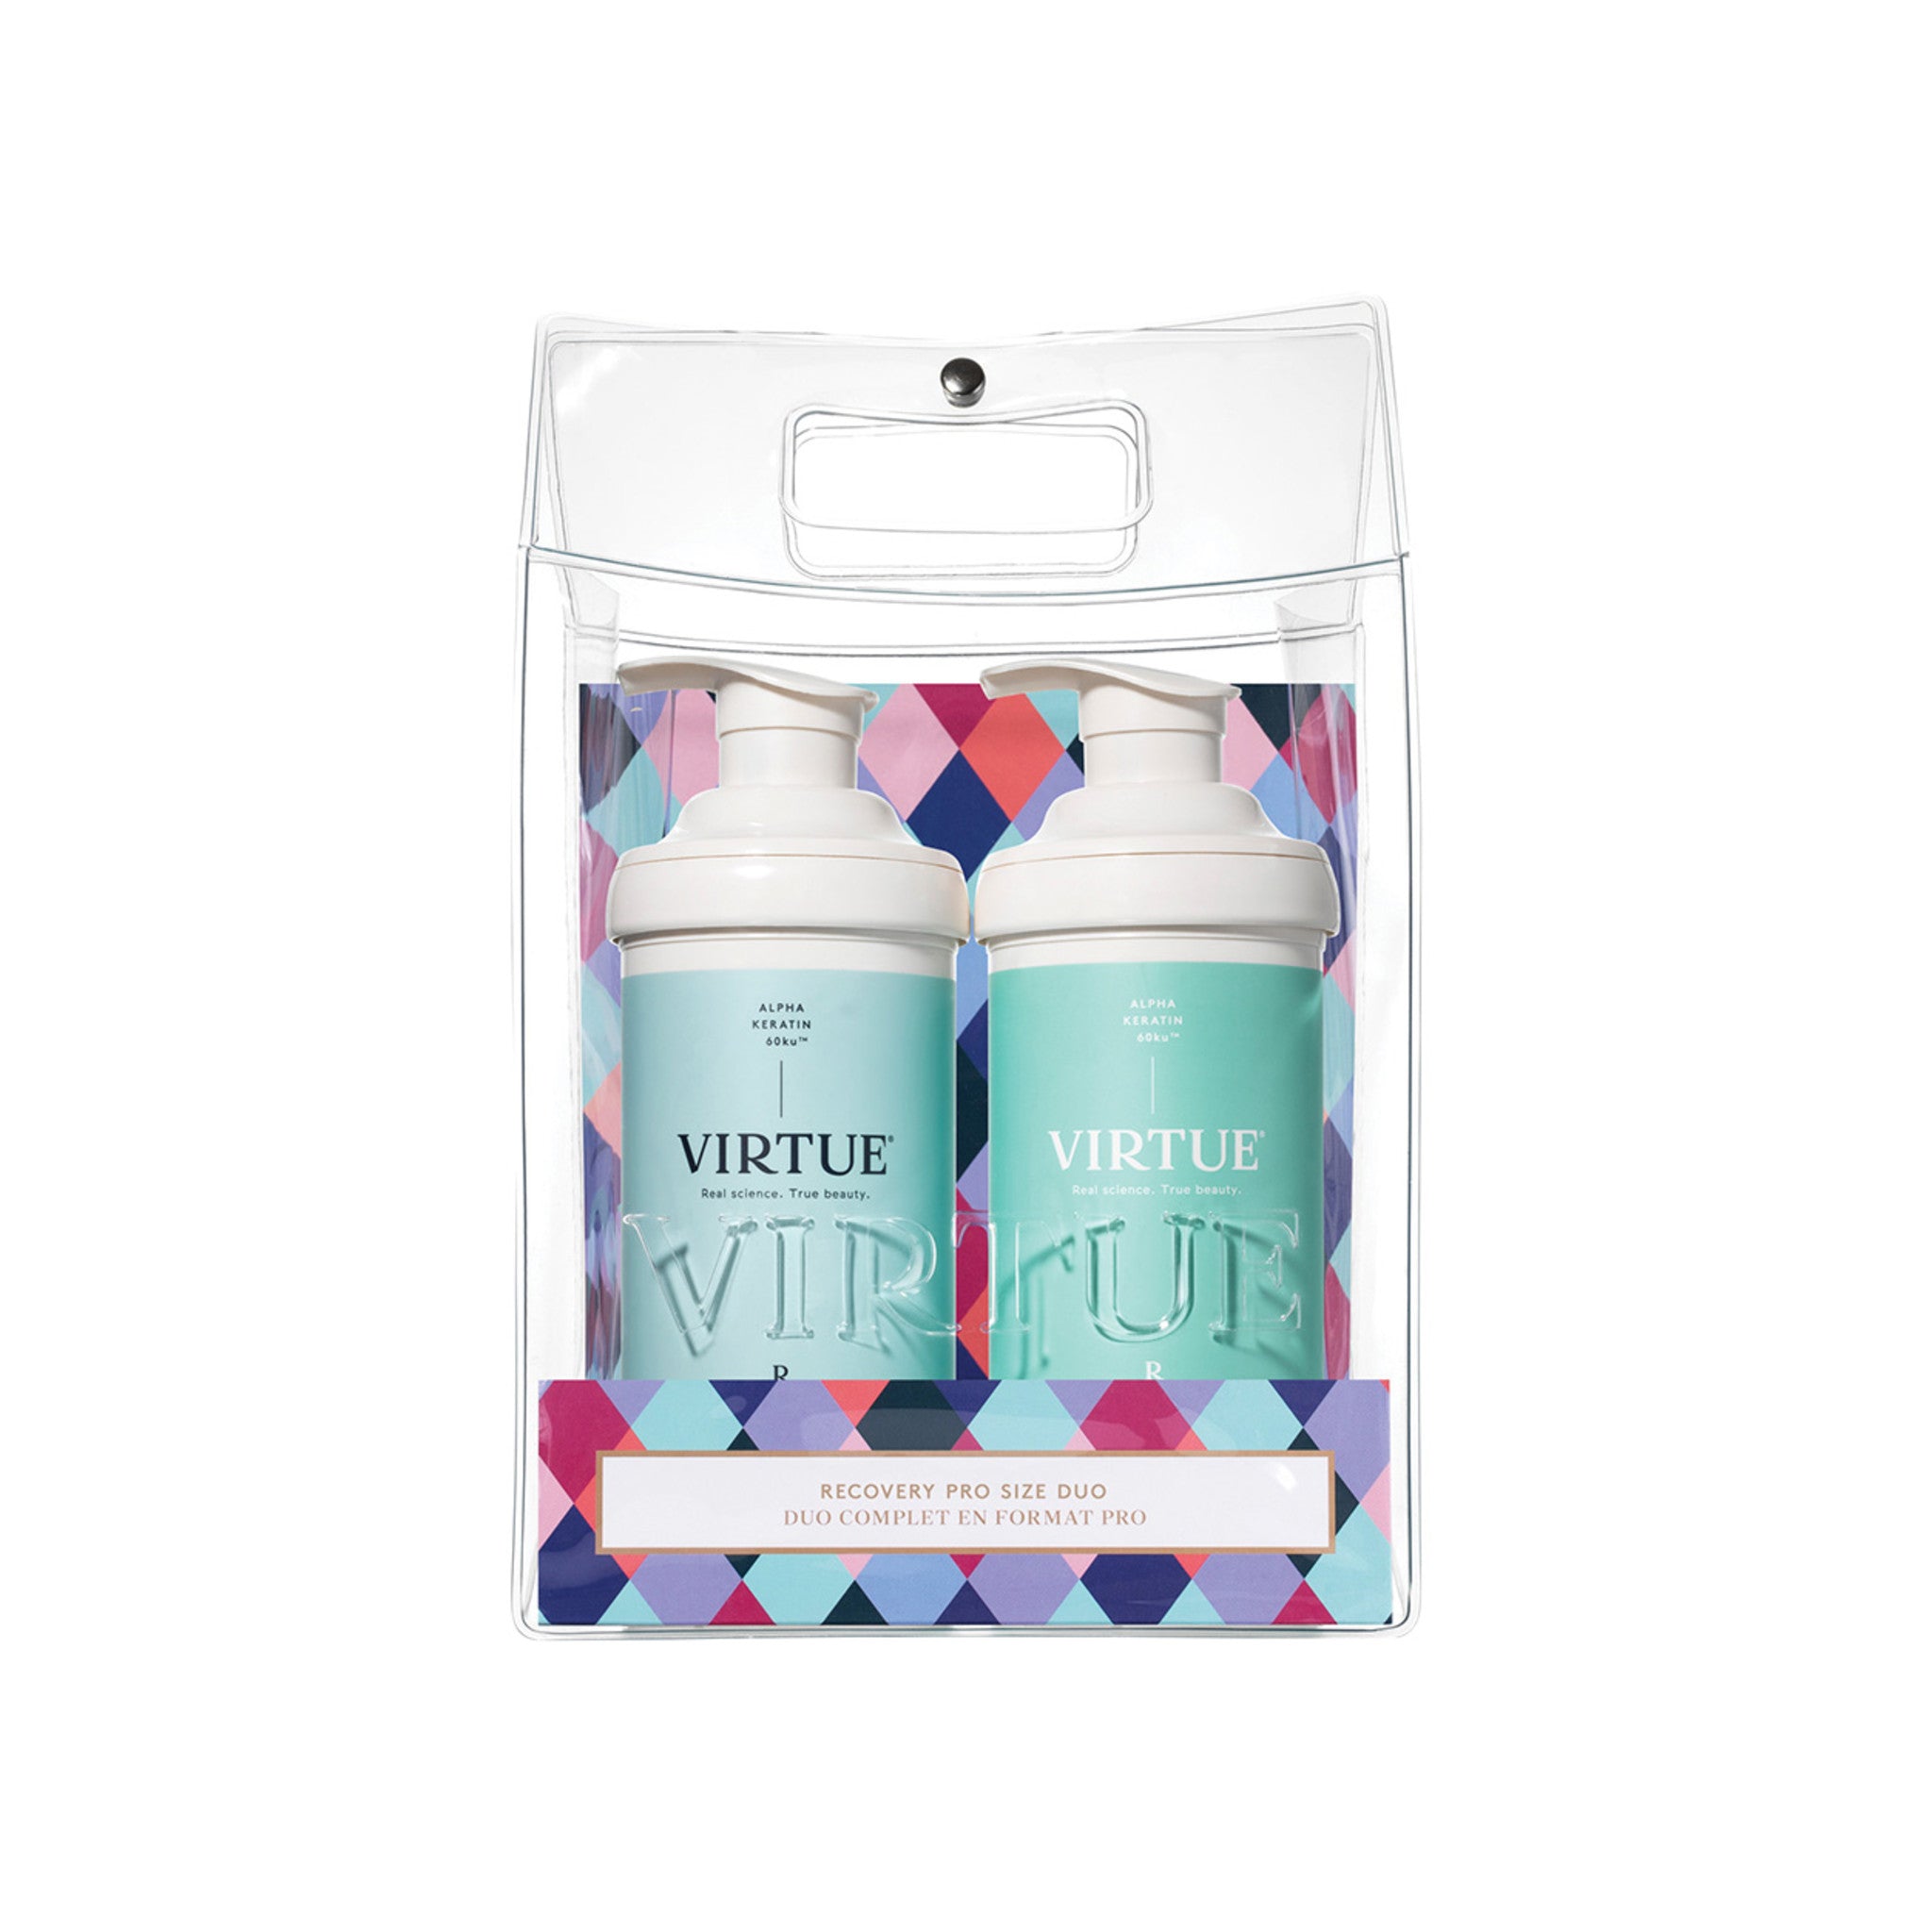 Virtue Celebrate Hair Repair: Recovery Pro Size Duo main image.